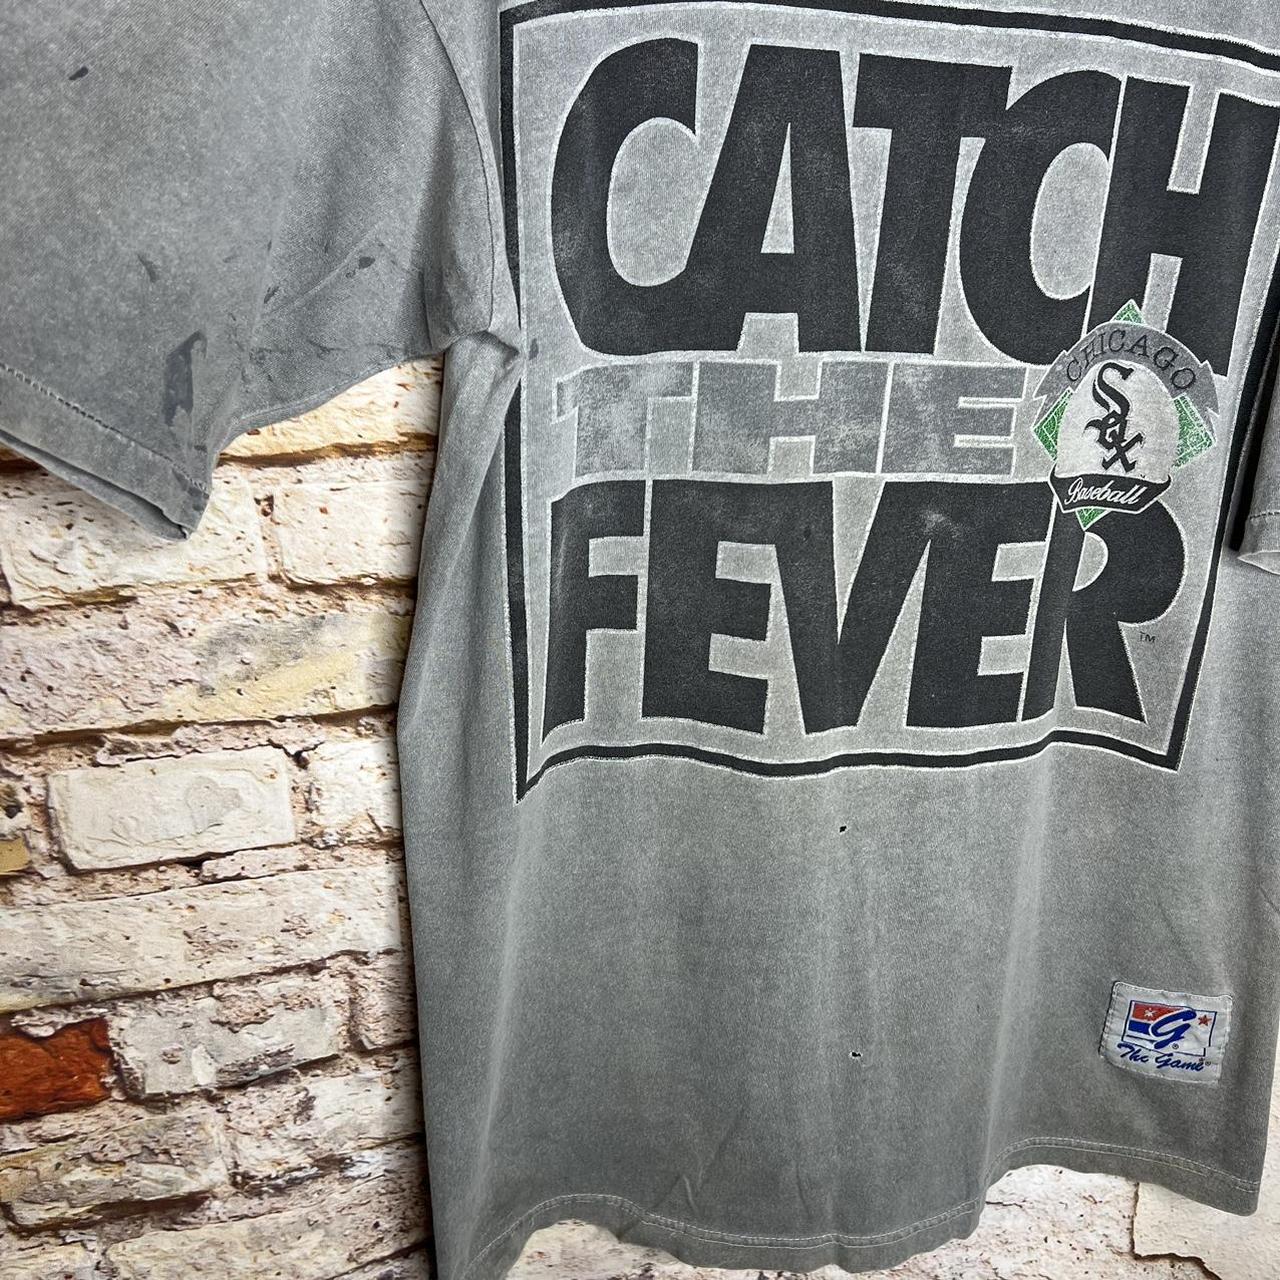 Colorado Rockies Catch The Fever Vintage T-Shirt By The Game! Nice!